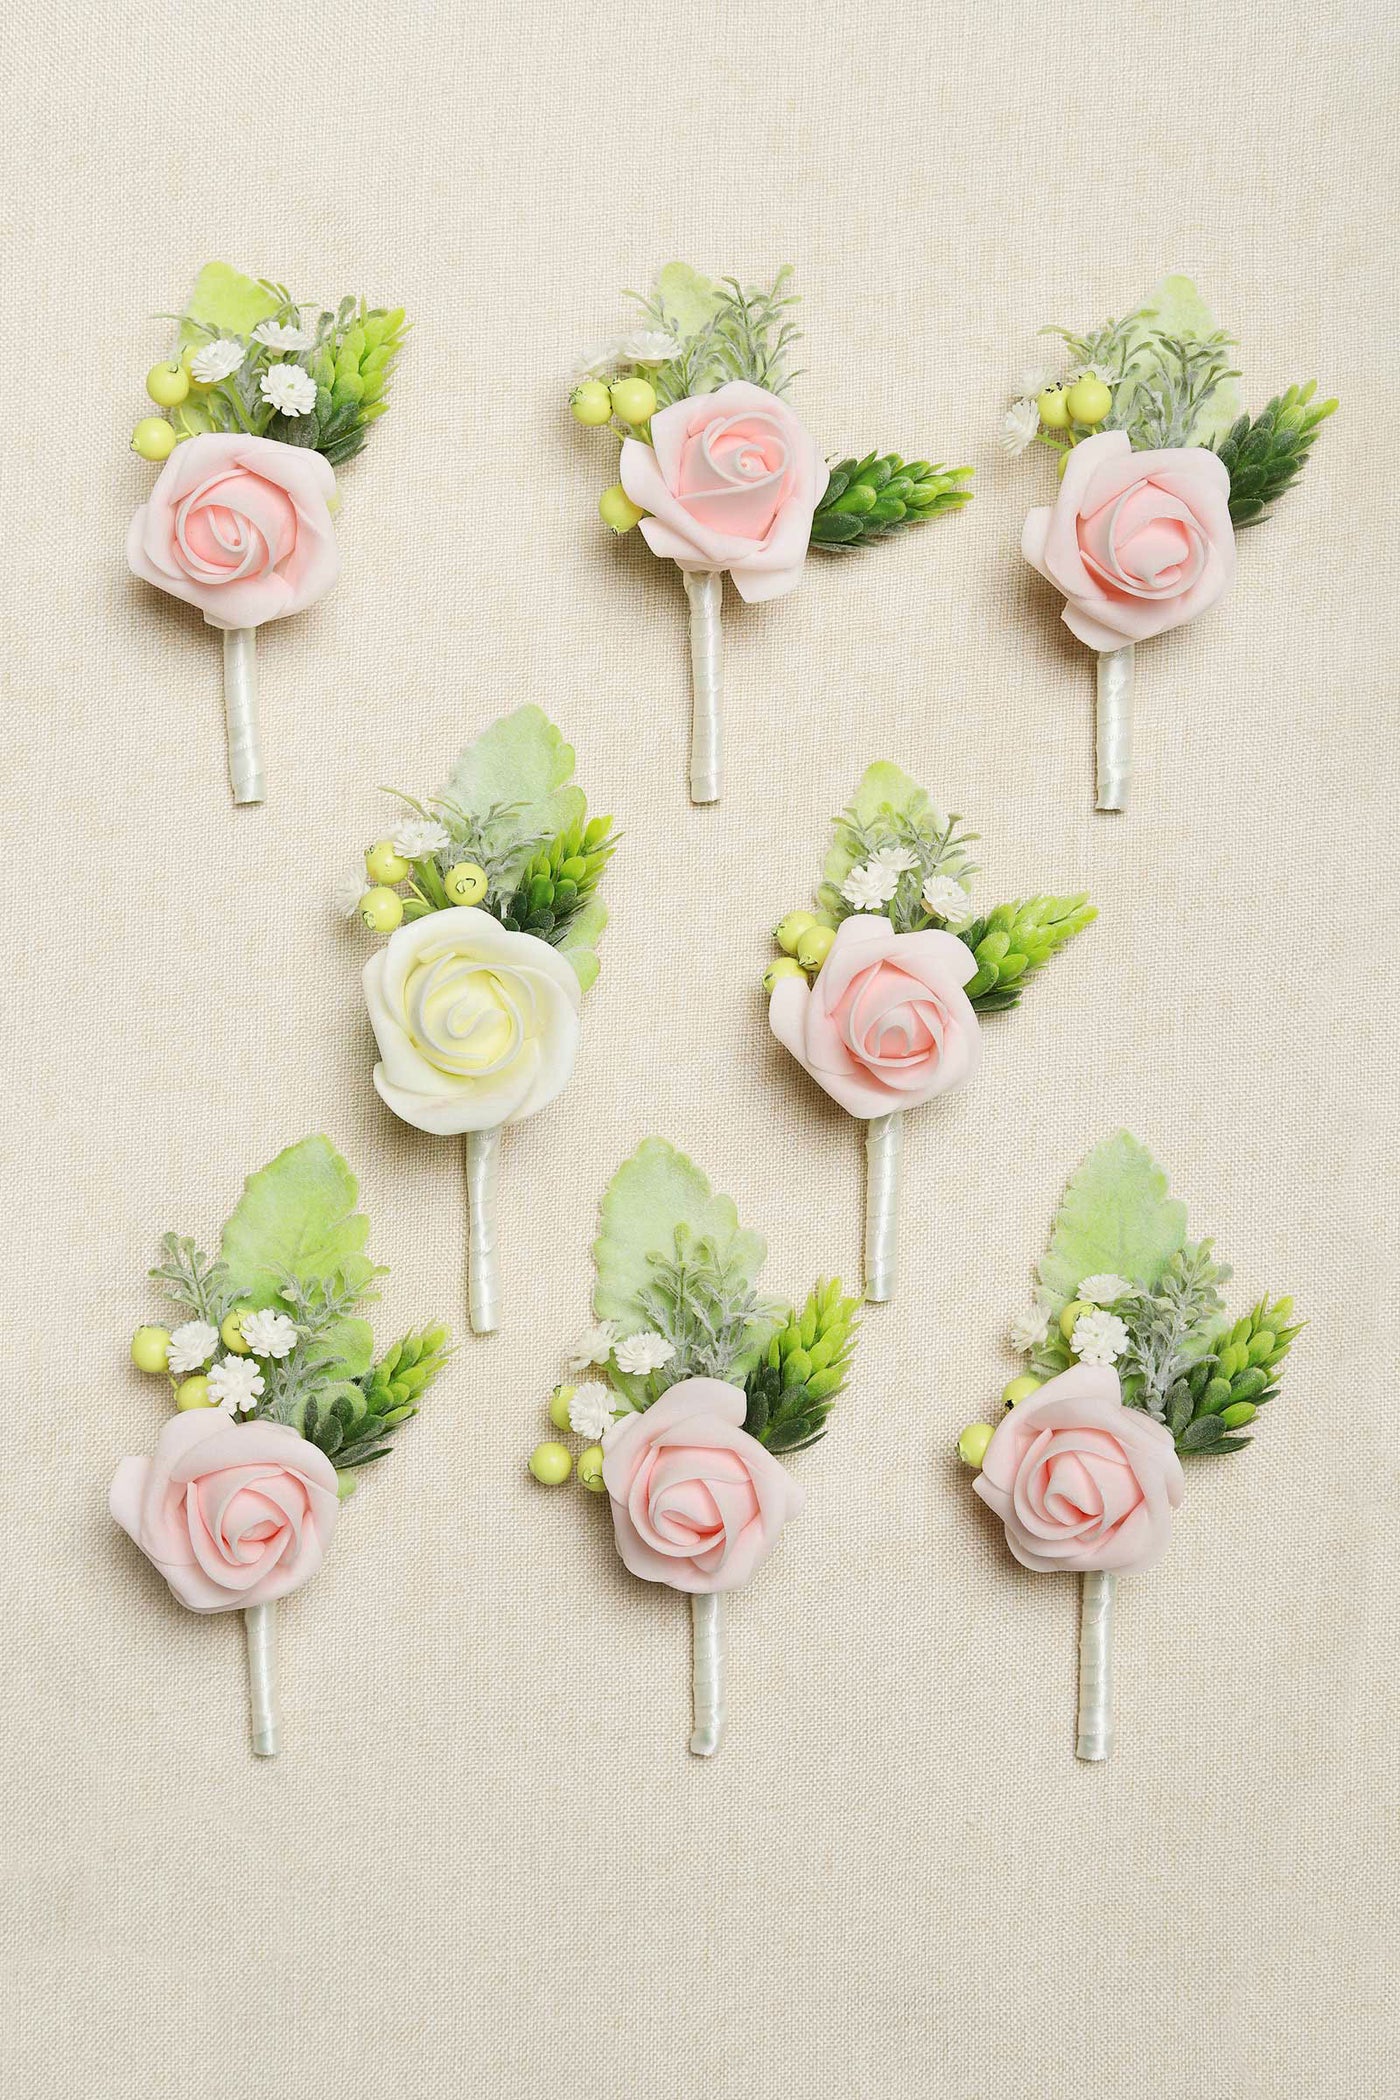 Wedding Boutonnieres with Pins Set of 8 - 6 colors